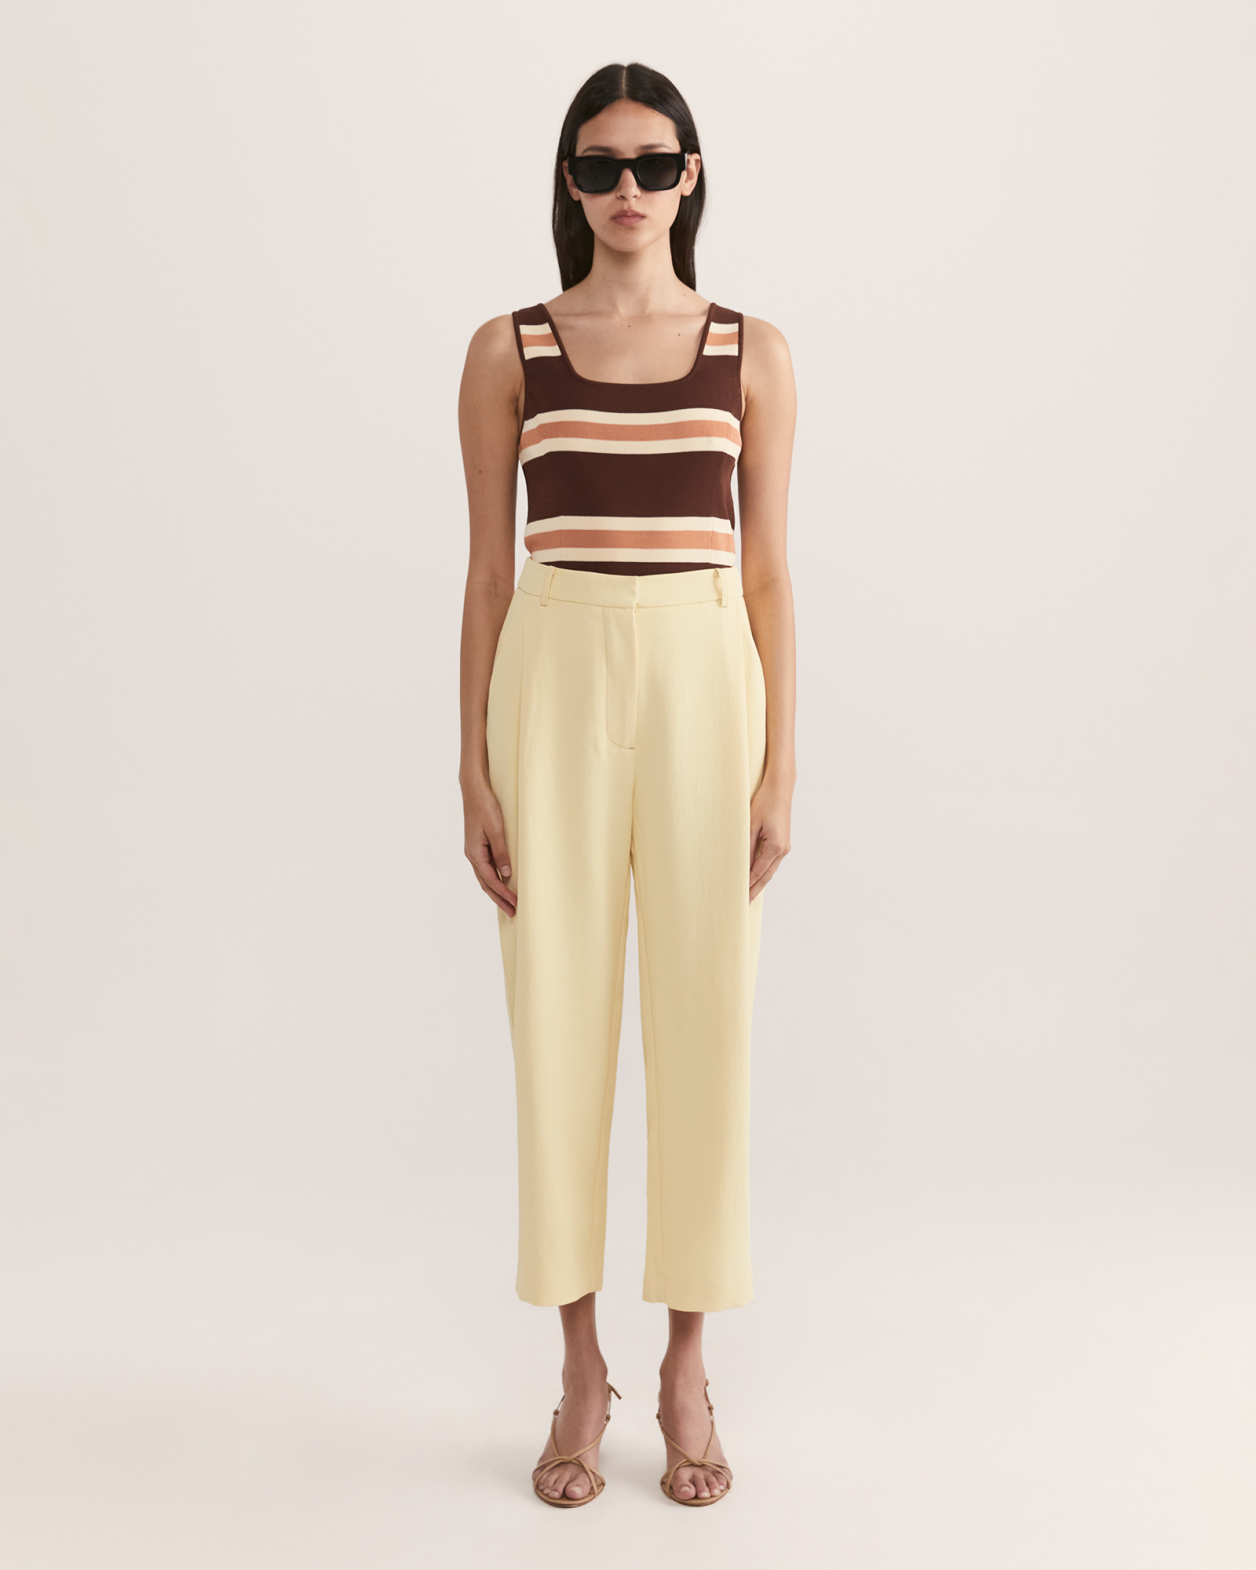 Dharma Tuck Front Culotte in DAFFODIL